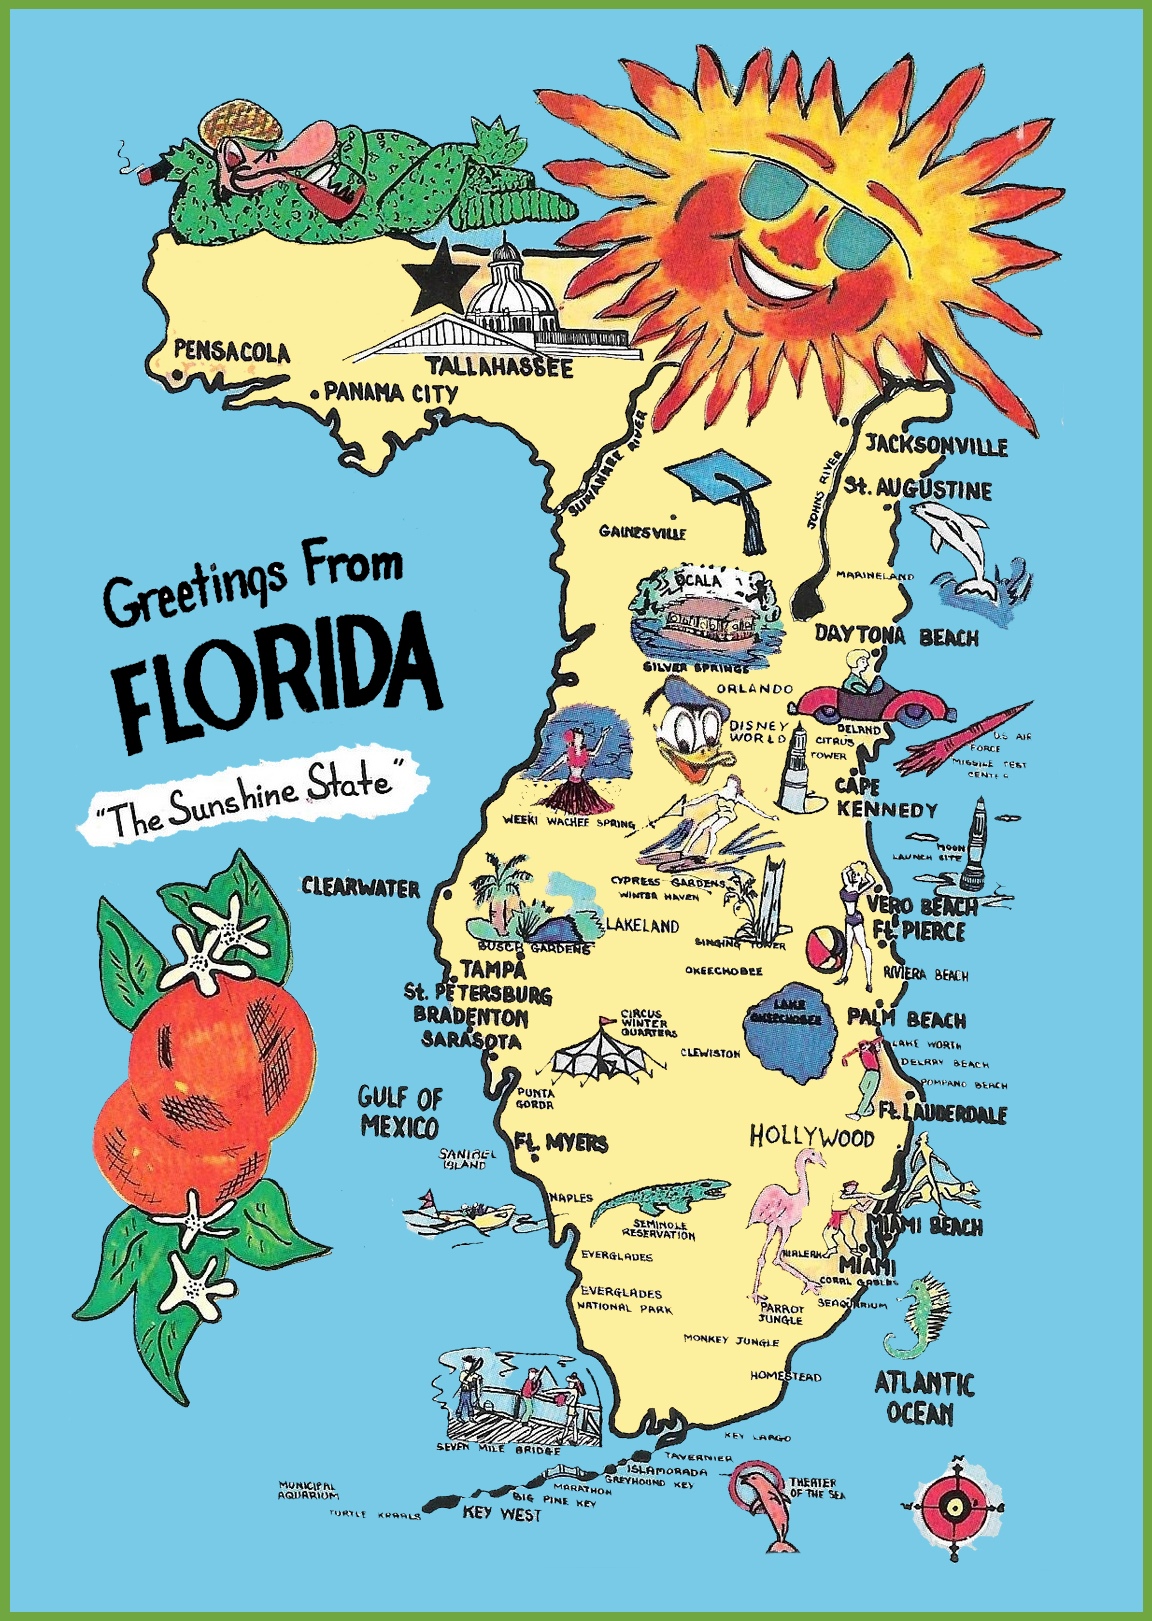 Pictorial Travel Map Of Florida